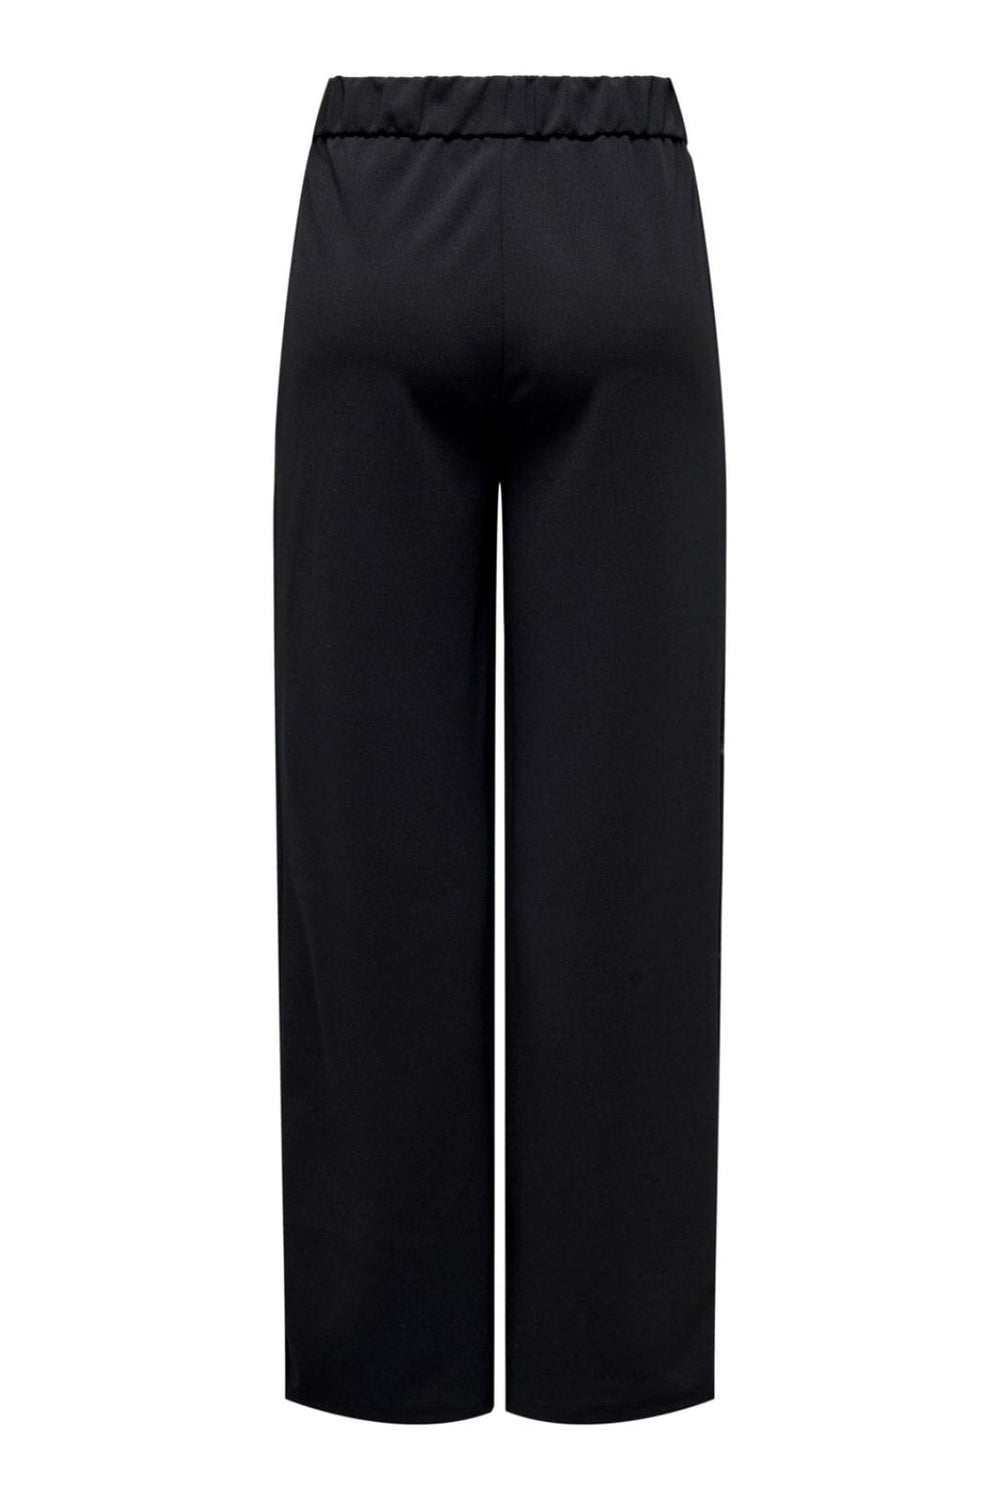 Only - Onlsania Tie Button Pant - 4282448 Black Bukser 